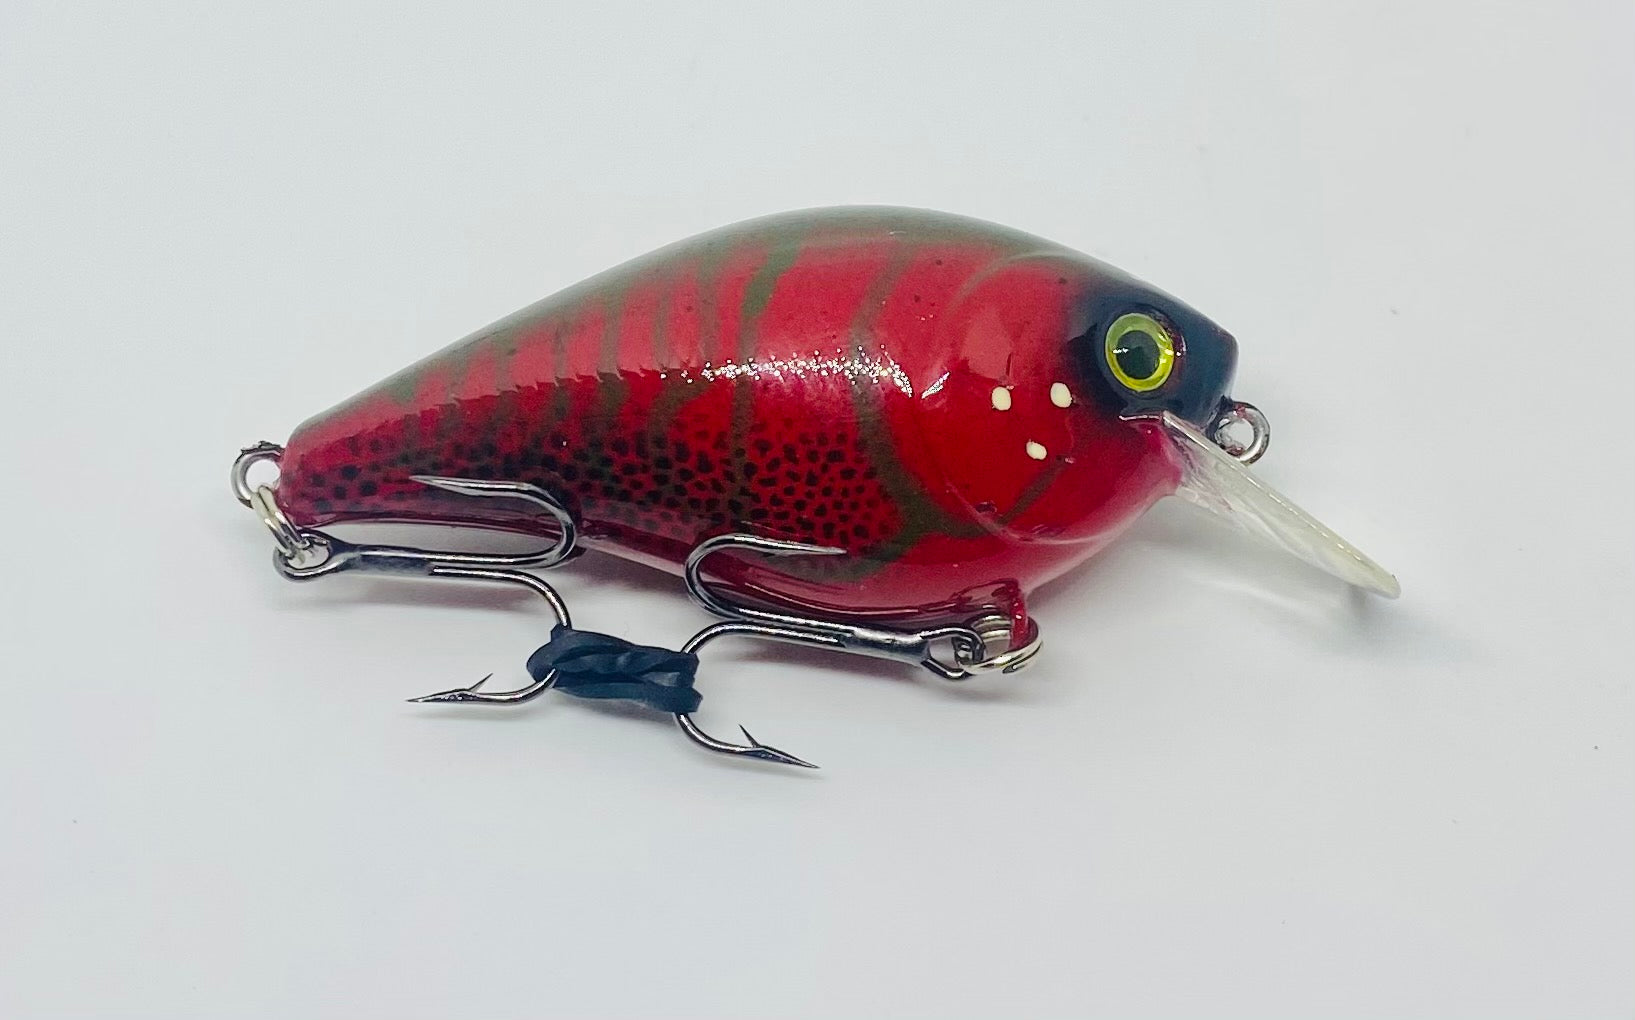 Crankbait Fishing - How to Use the Square Bill